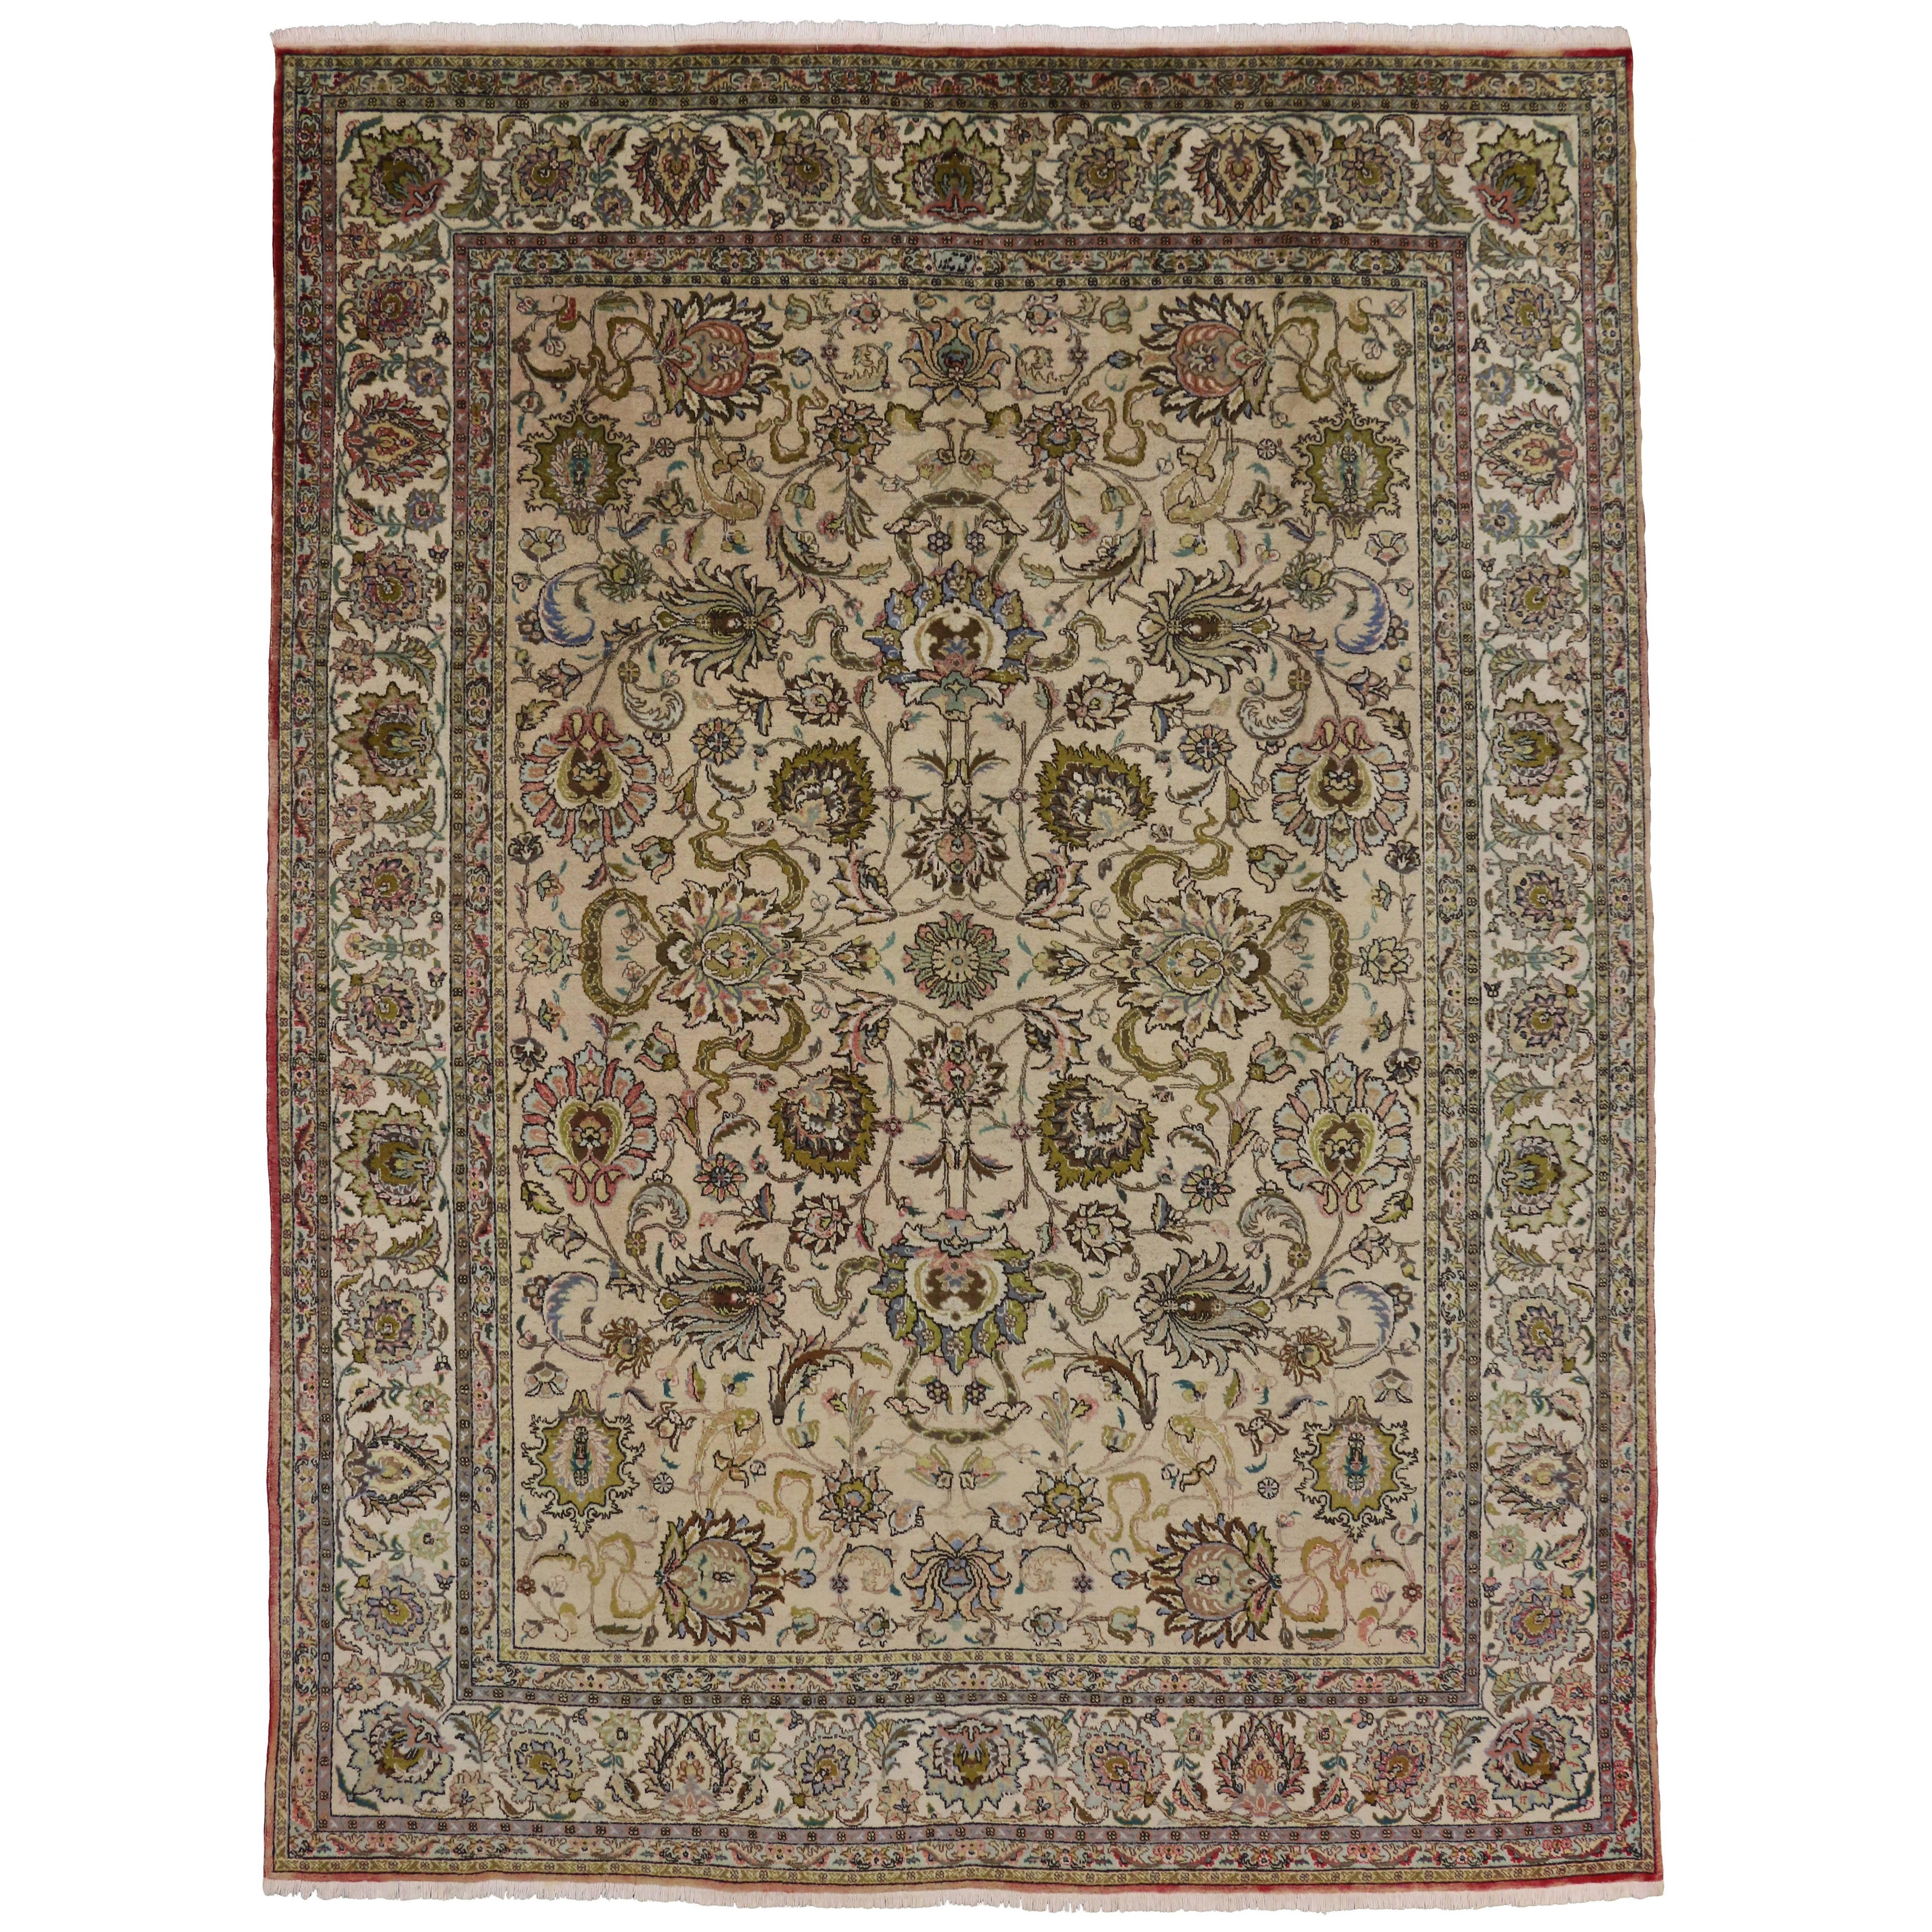 Vintage Persian Tabriz Area Rug with French Provincial Cottage Style